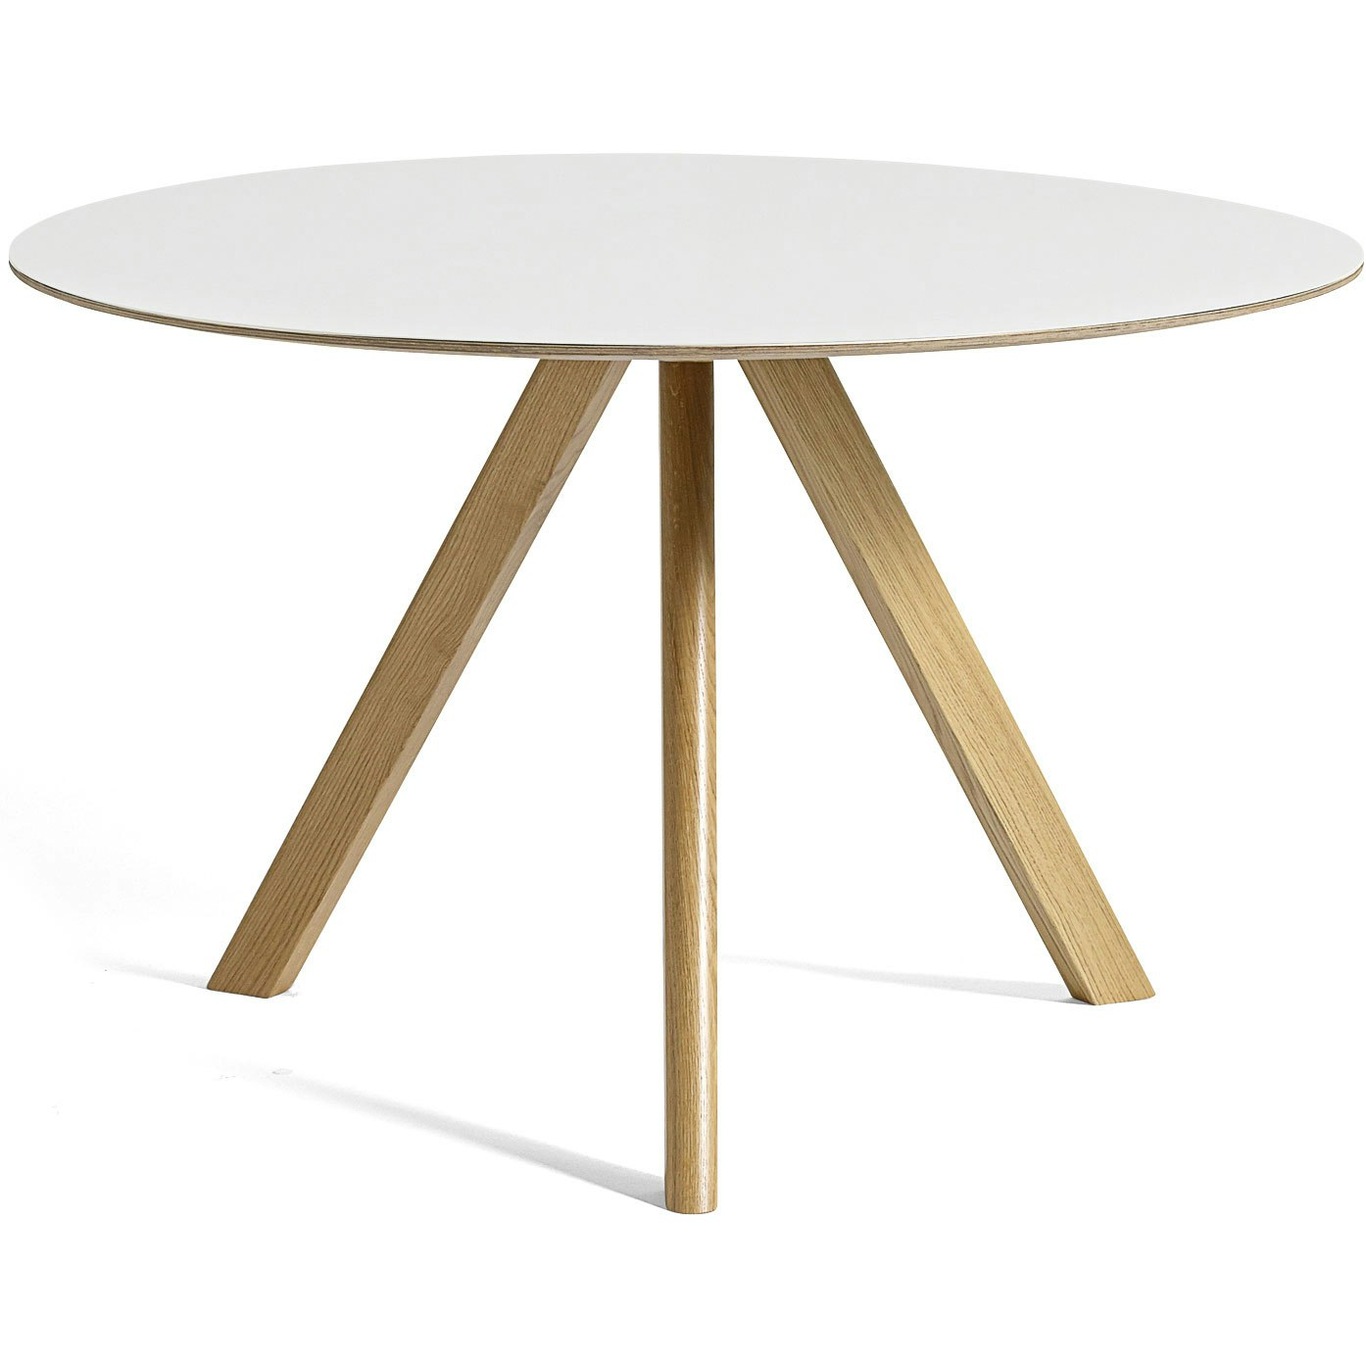 CPH20 Table Ø120x74 cm, Water based lacquered Oak / White Laminate